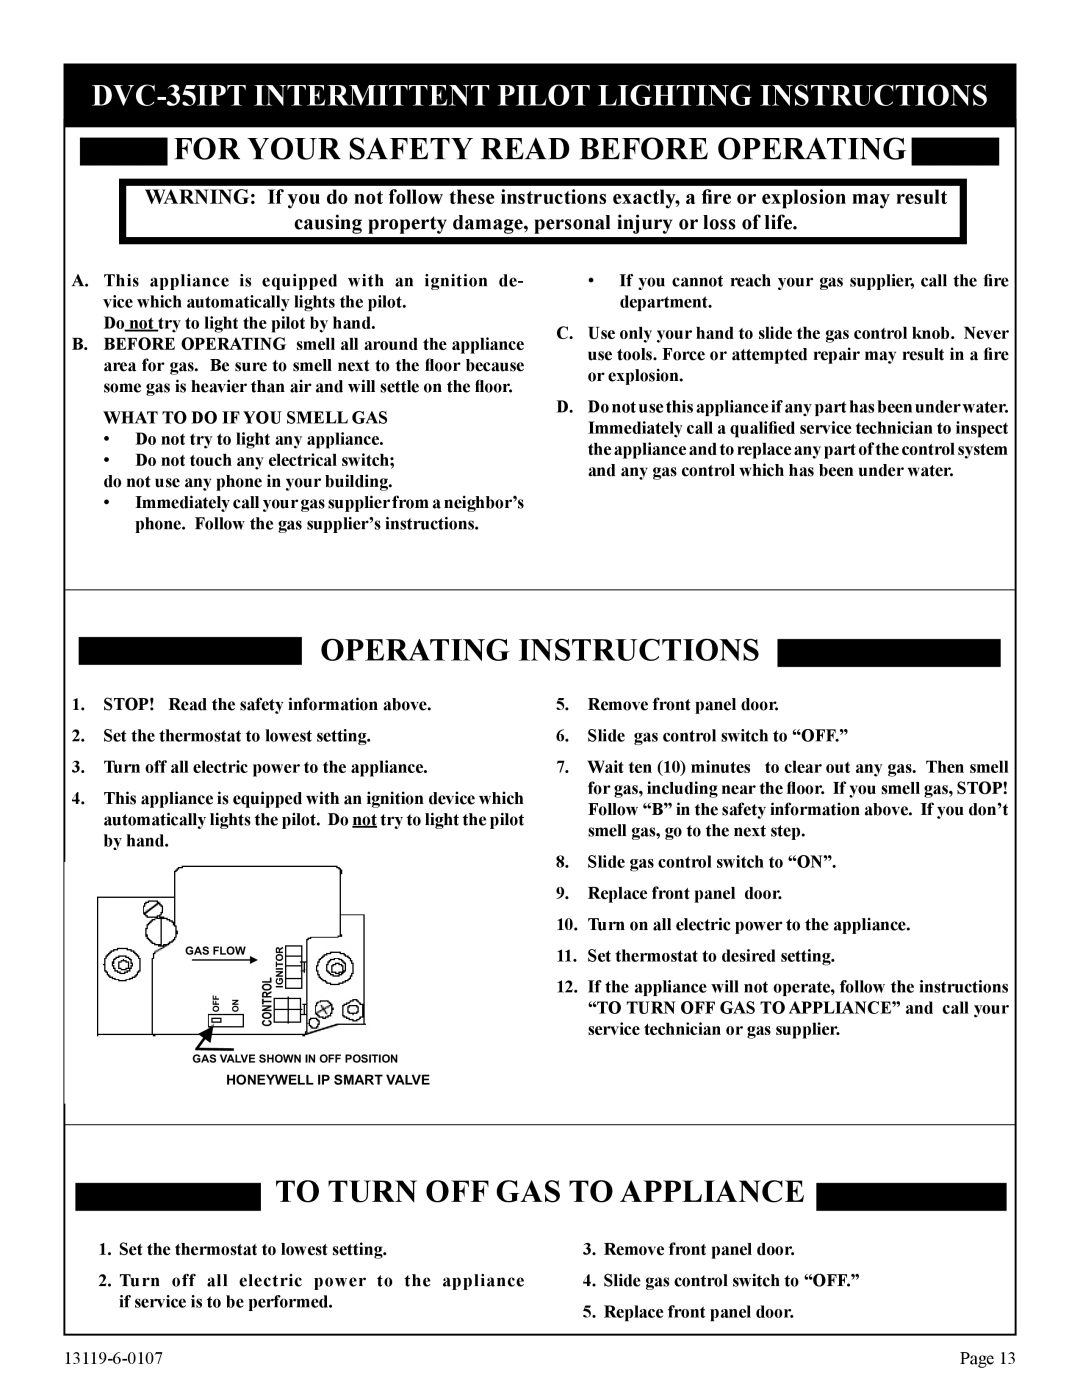 Empire Products DVC-35T-1 For Your Safety Read Before Operating, Operating Instructions, To Turn Off Gas To Appliance 